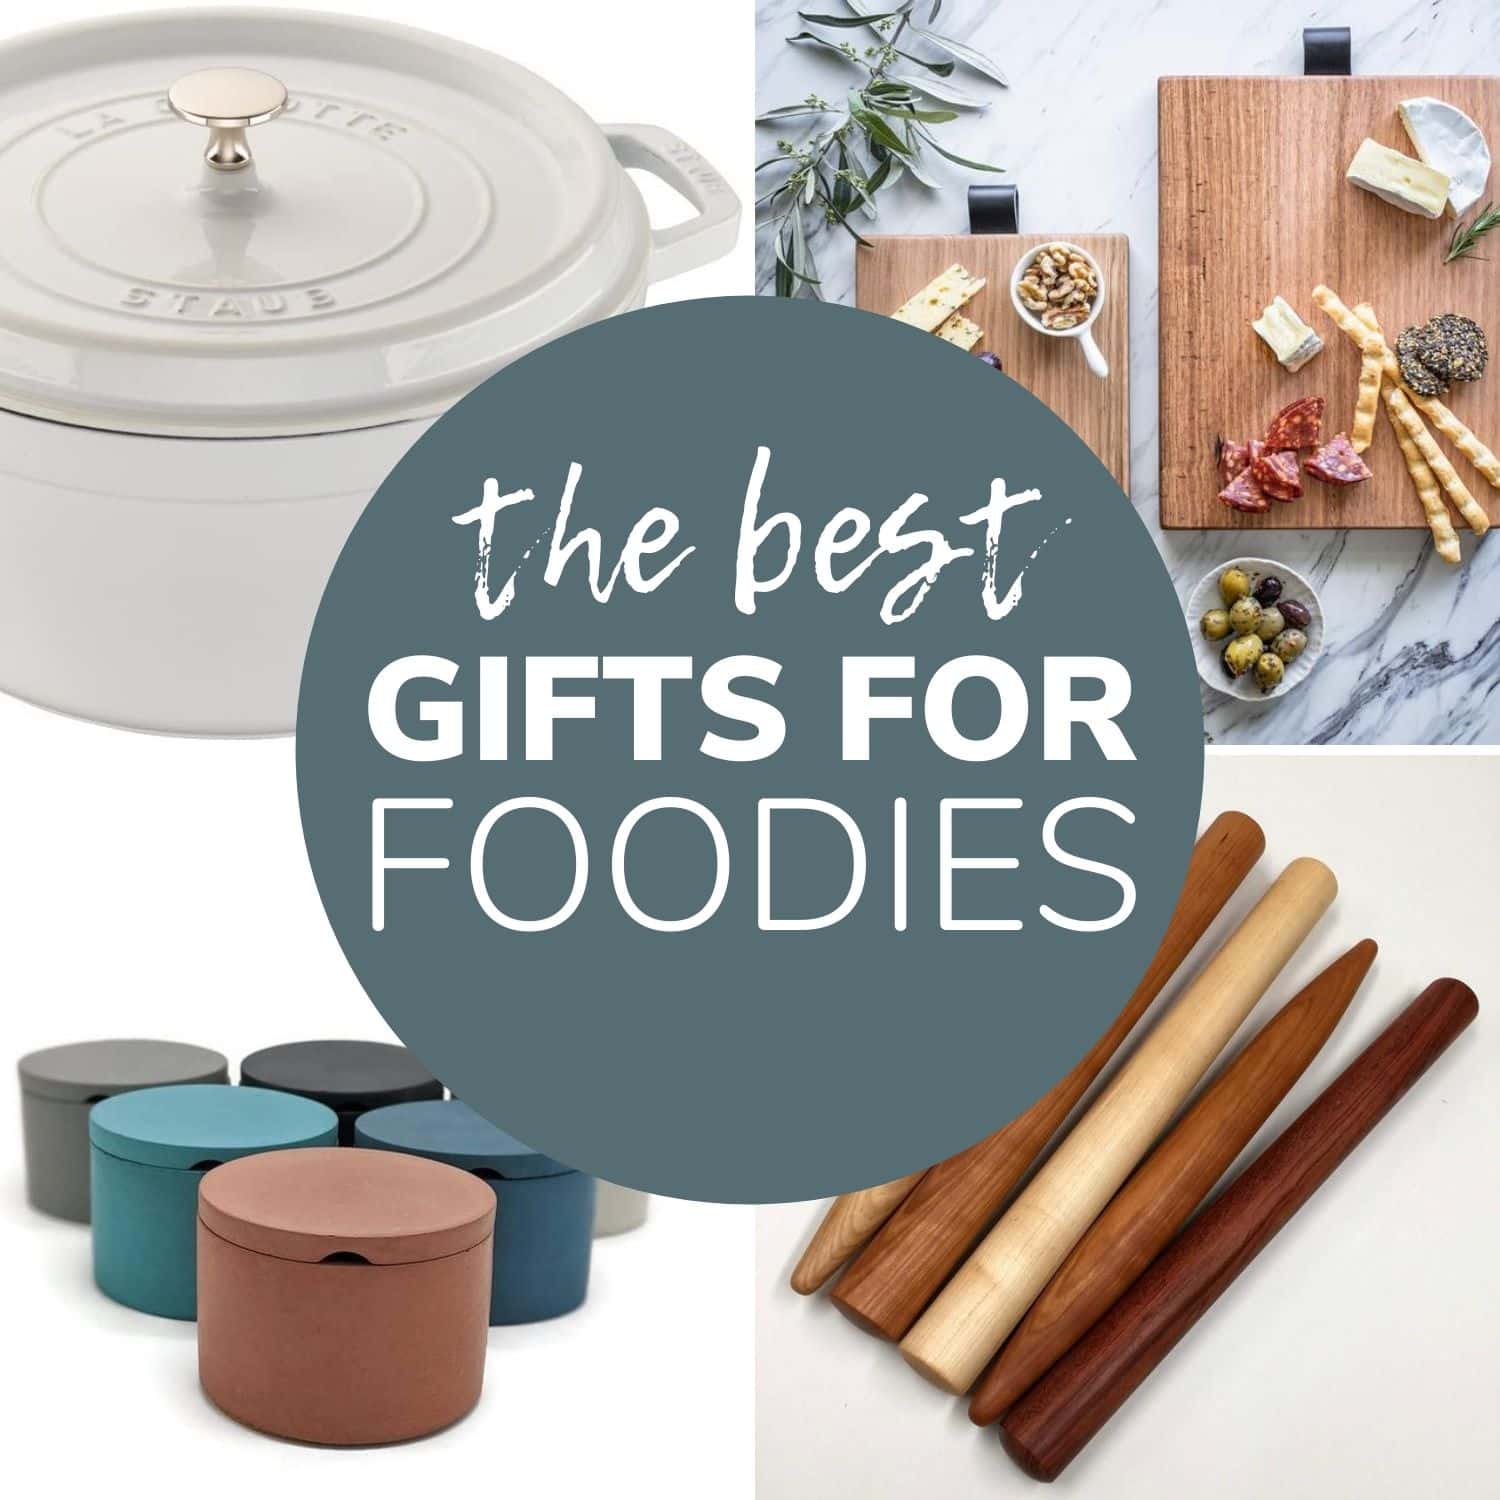 https://www.mapleandmango.com/wp-content/uploads/2020/11/best-gifts-for-foodies-feature.jpg